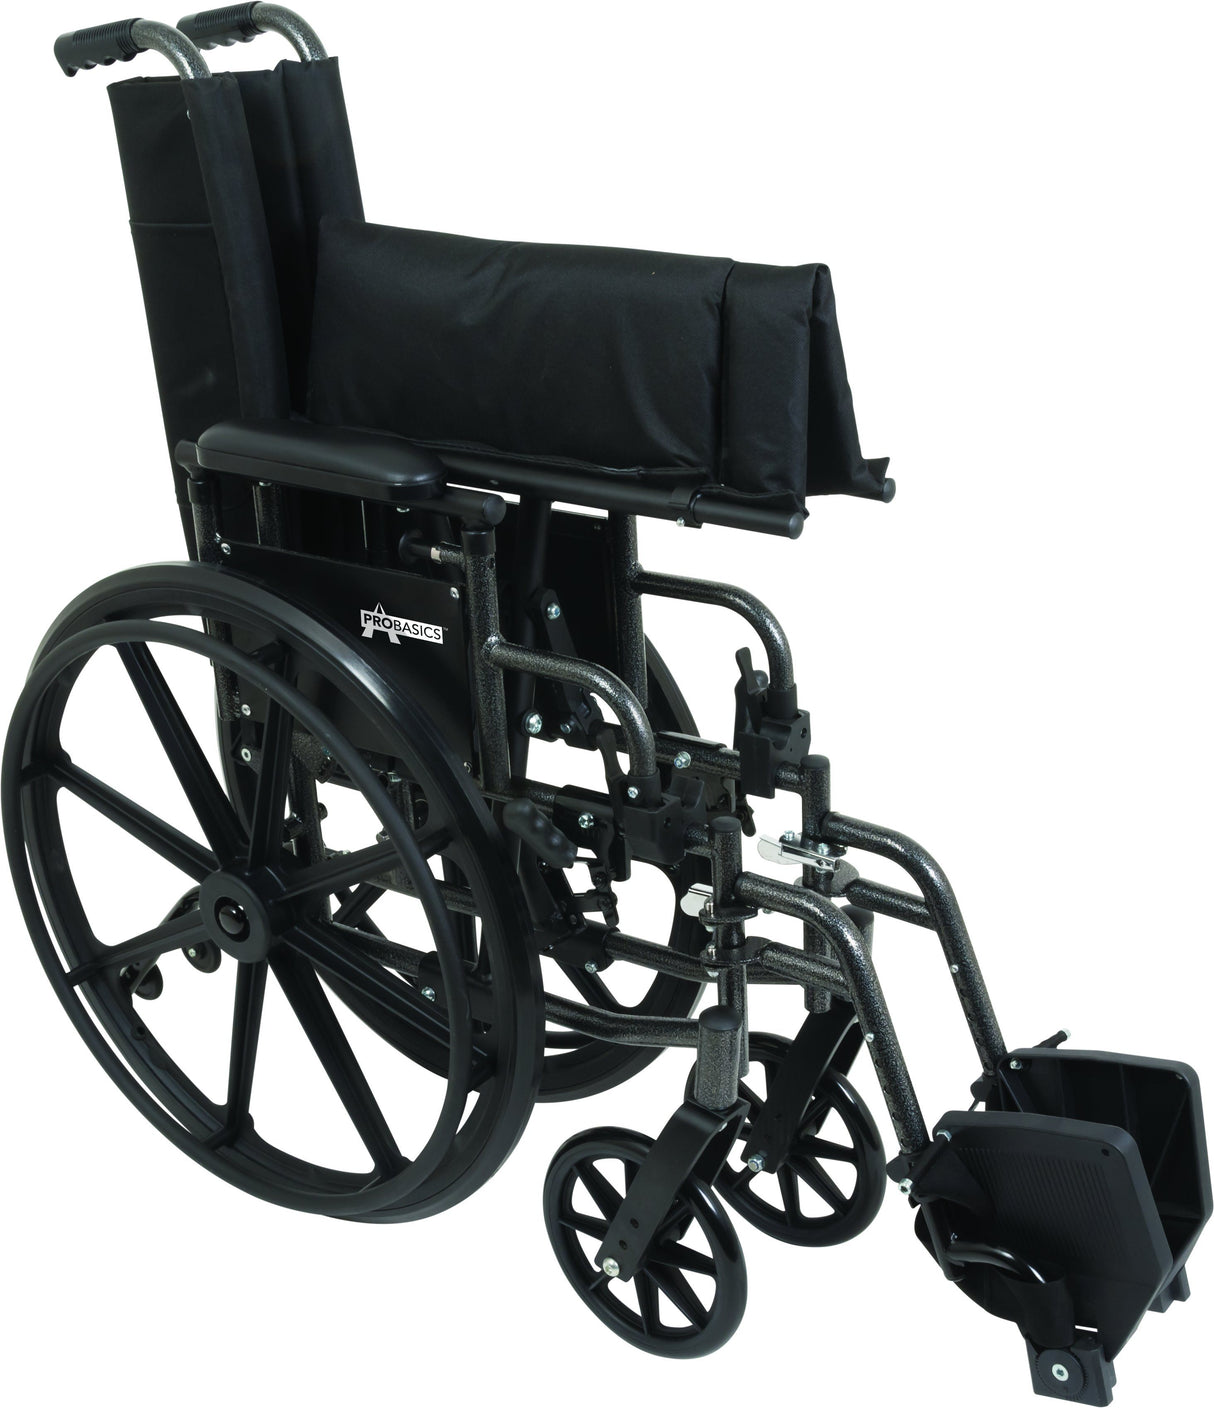 Image of ProBasics High Performance Lightweight K4 Wheelchair, 16" x 16" Seat with Swing-Away Footrests, 300 lb Weight Capacity